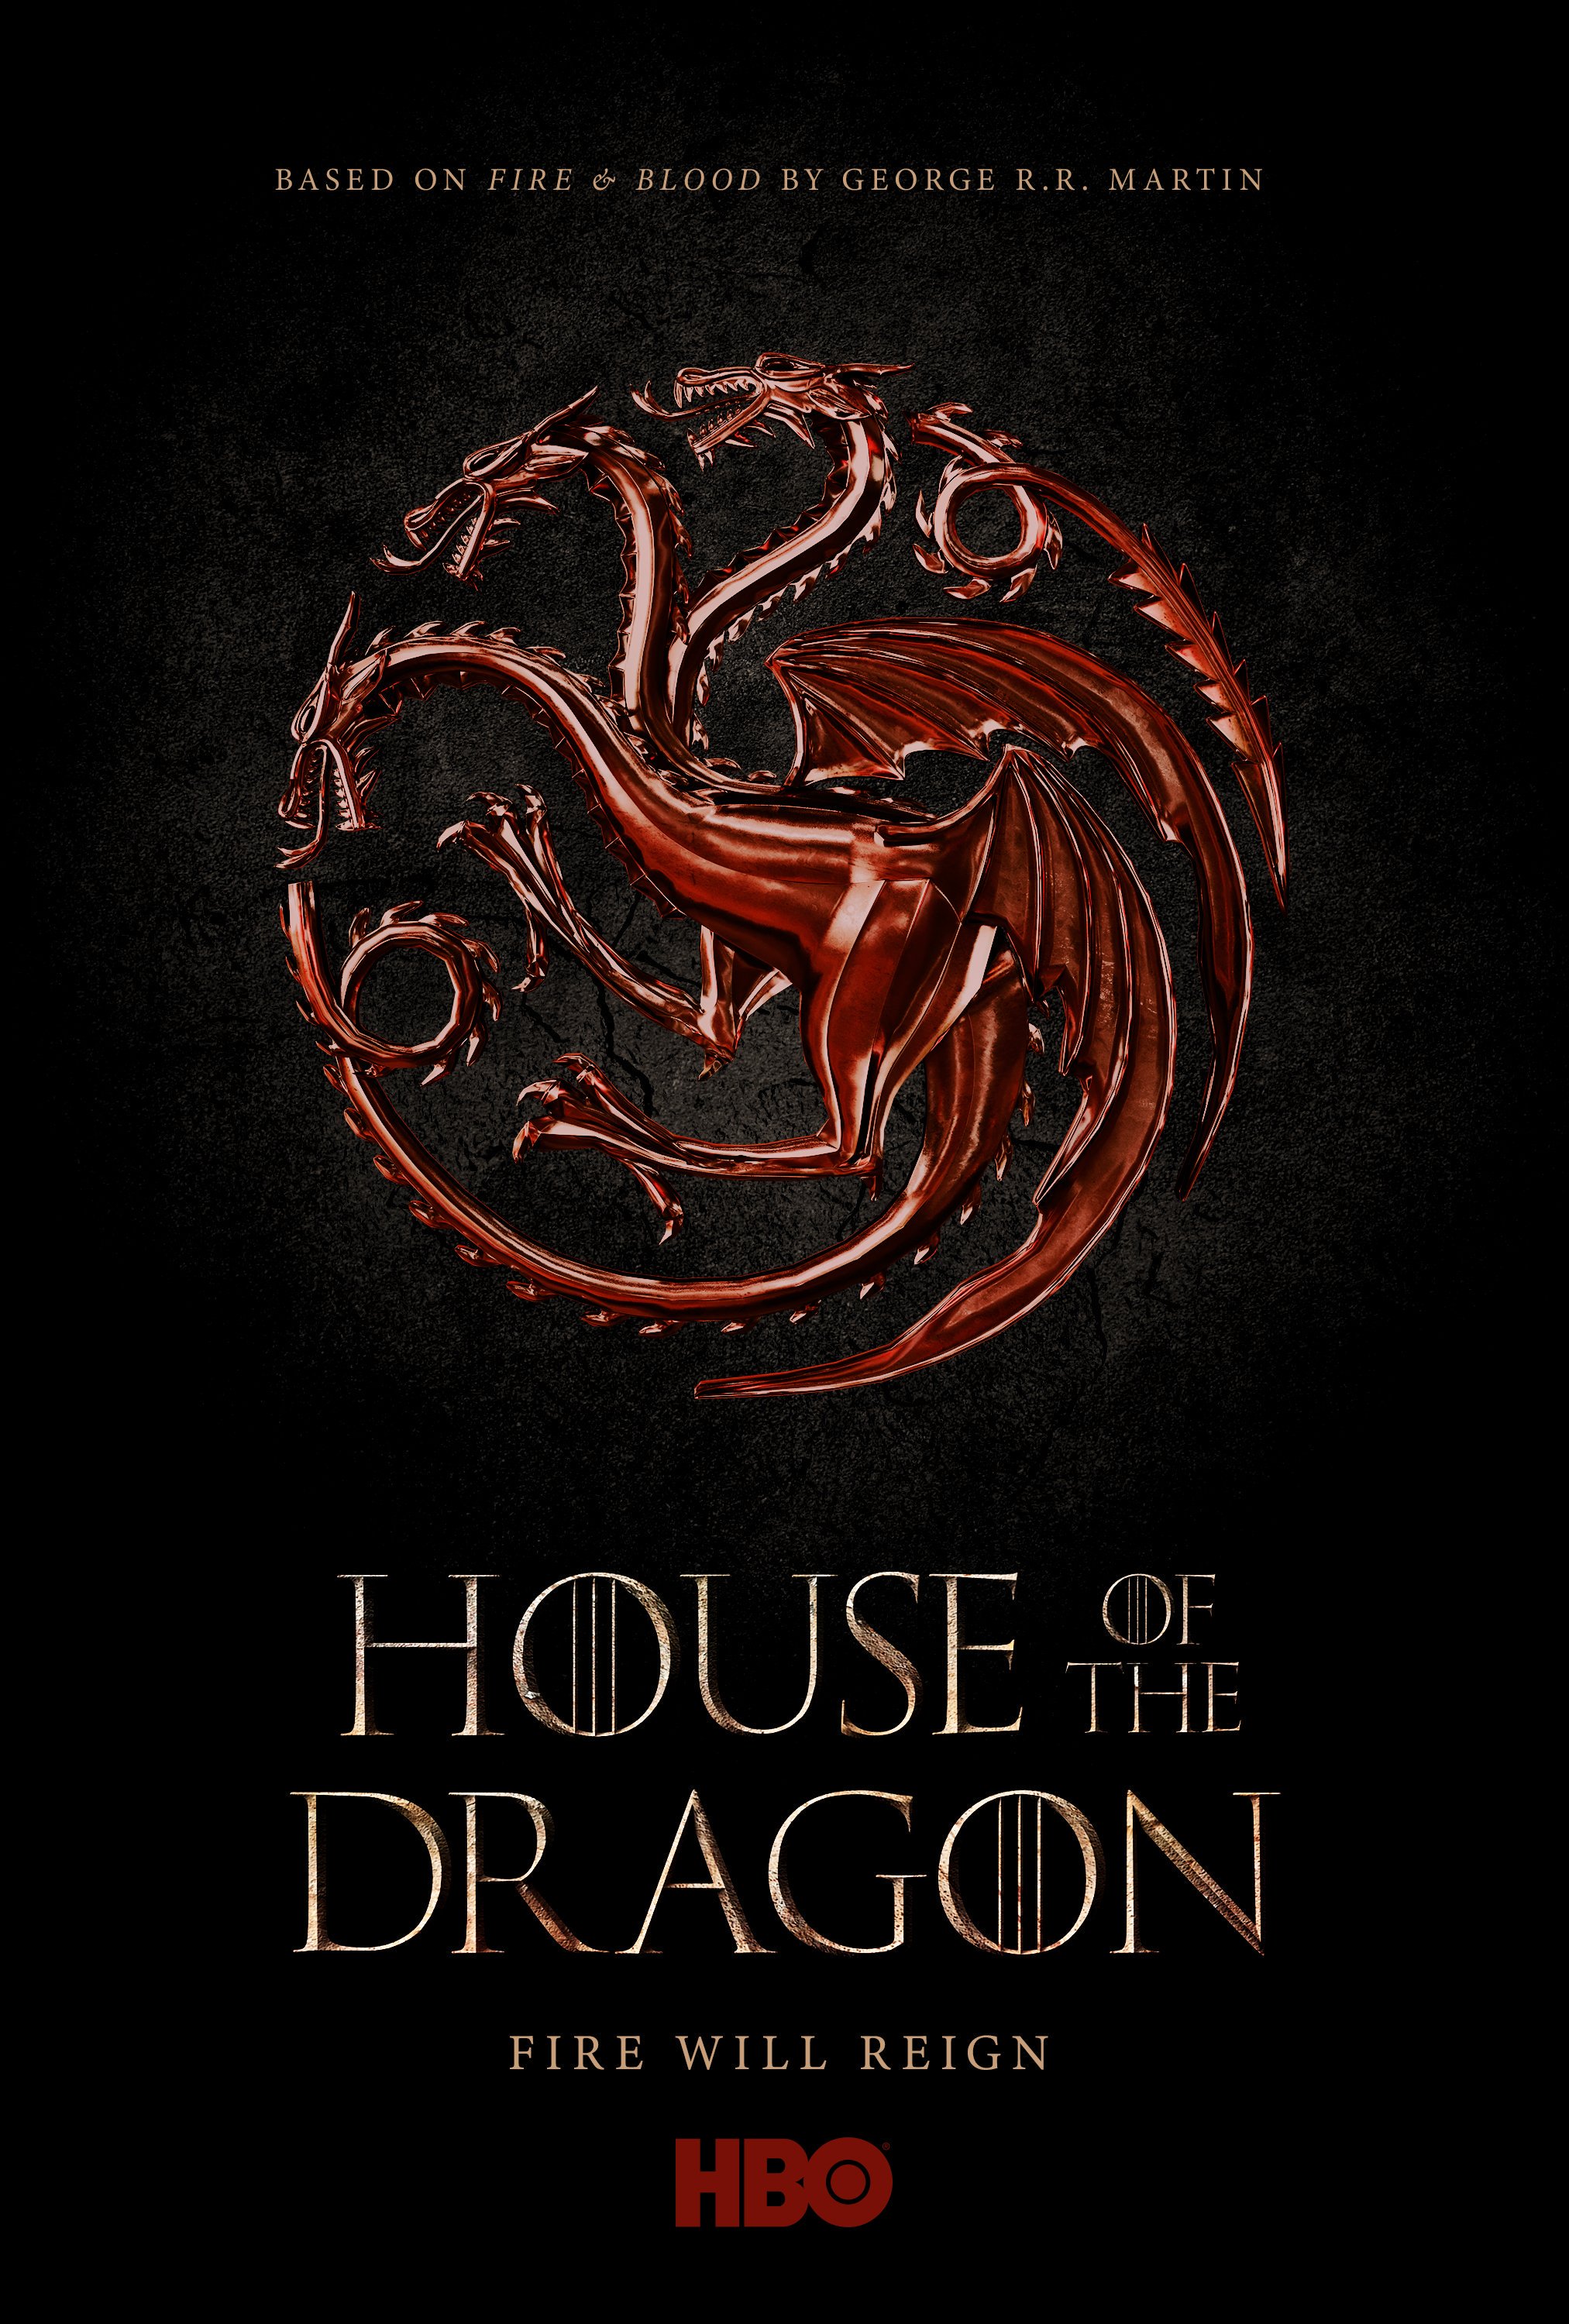 HBO’s GoT Spin-off “House of the Dragon” Tells the Story of House Targaryen